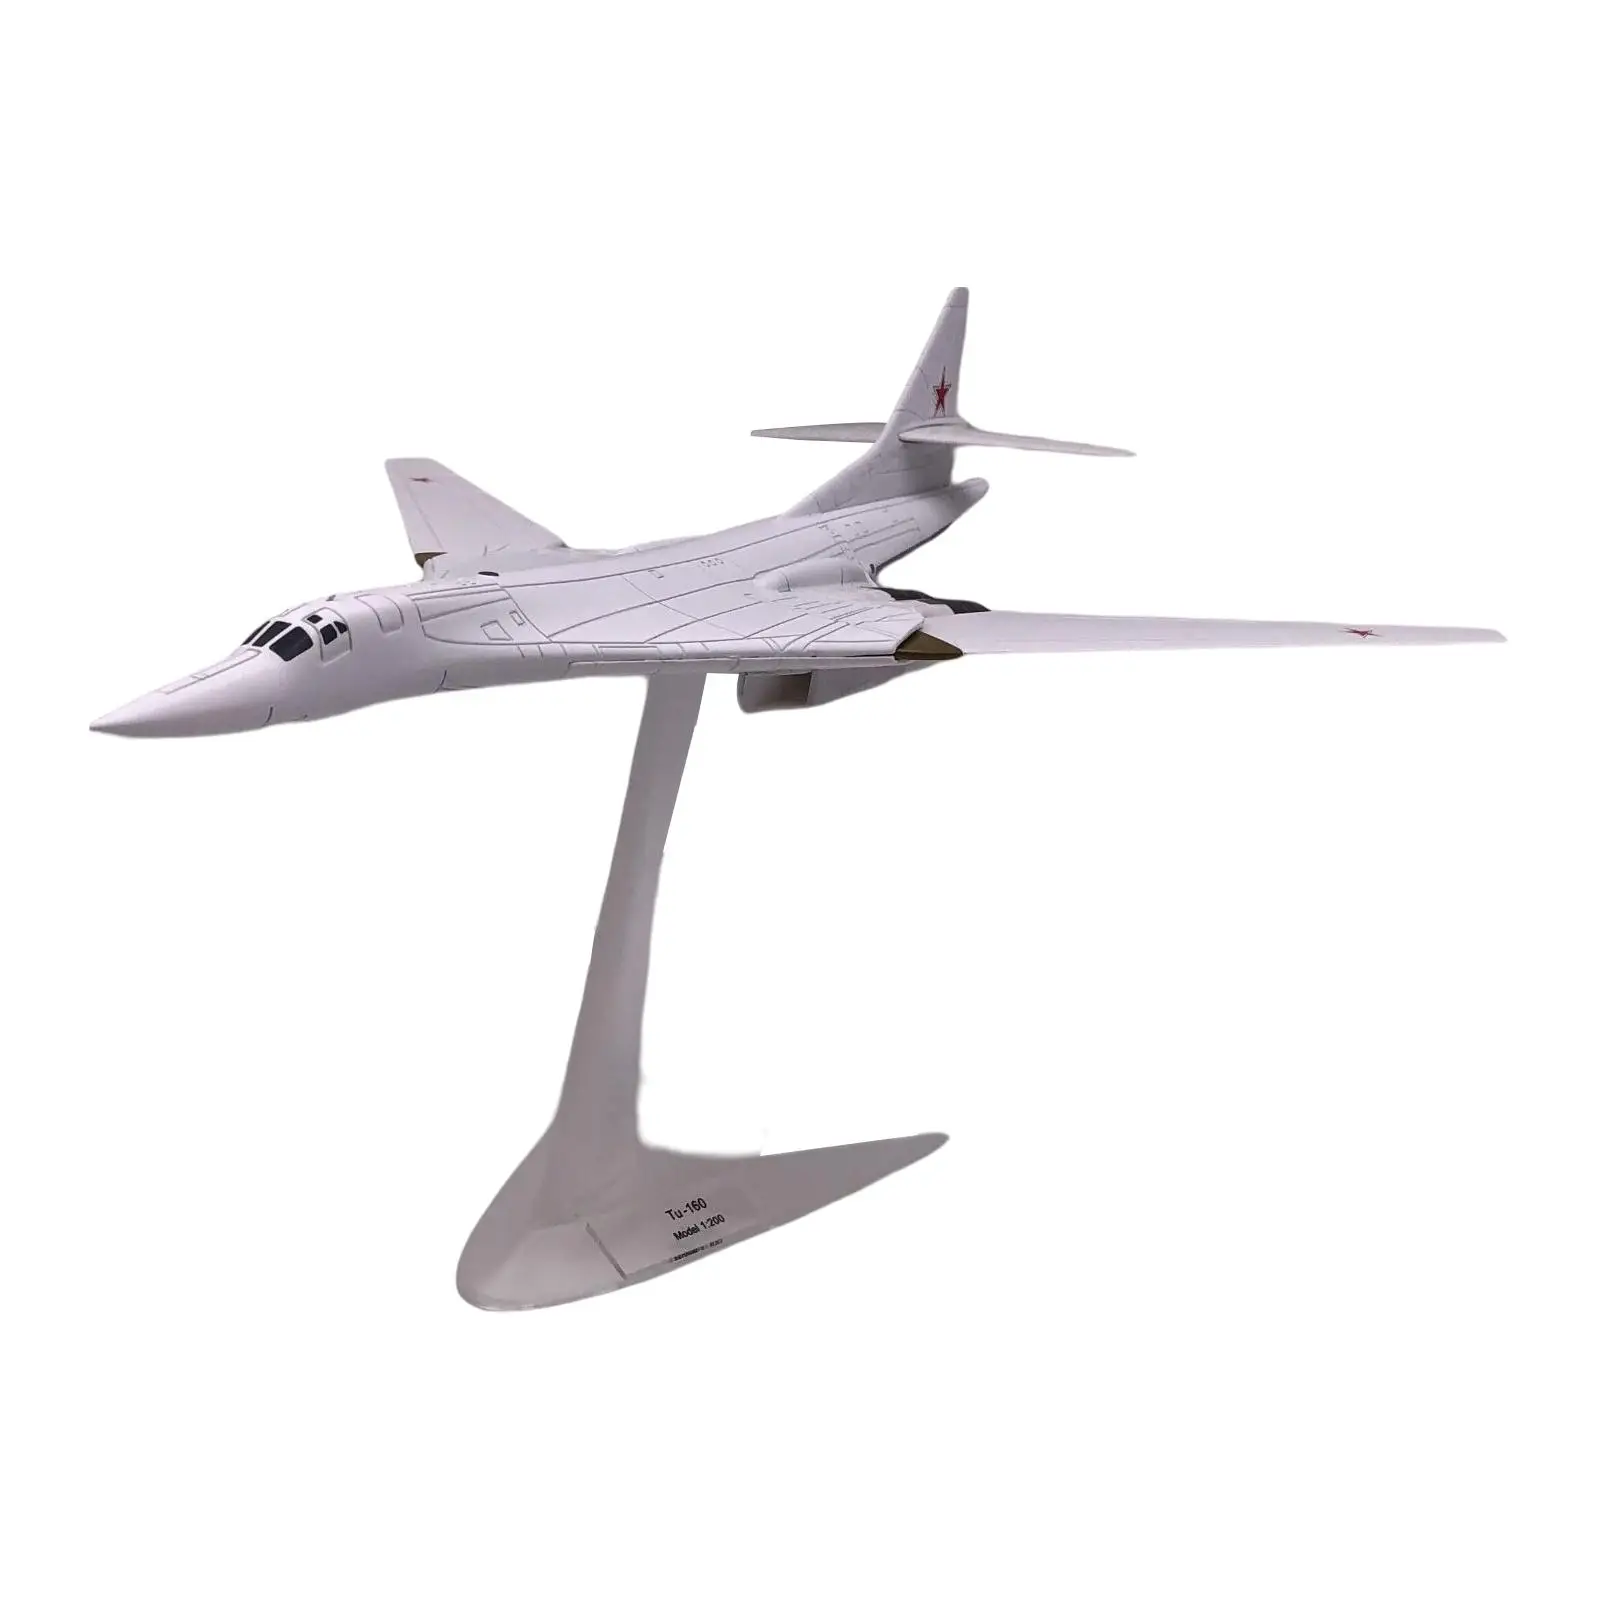 Metal 3D Bomber Fighter Model Plain Fighter Toy 1:200 Scale Air Planes Diecast for Desktop Bedroom Office Collection